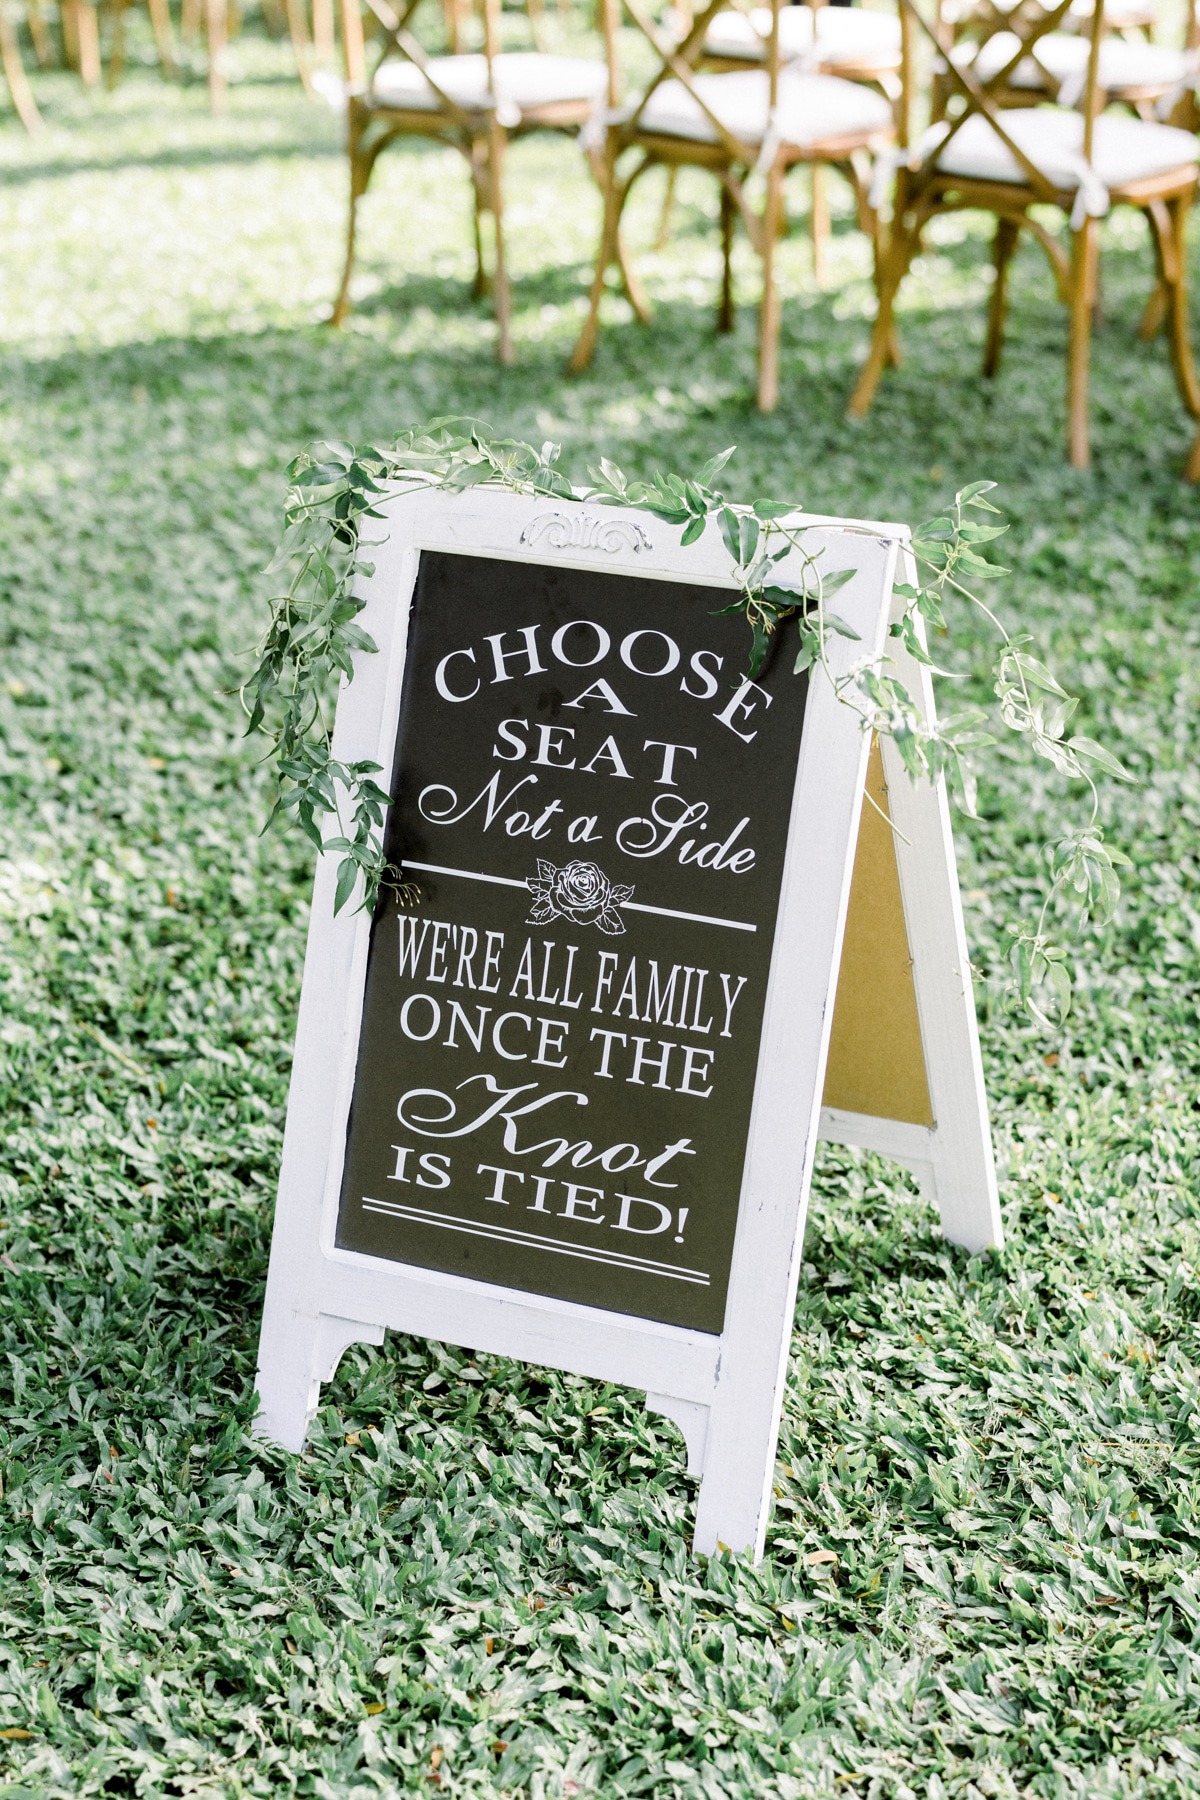 Choose a seat not a side wedding sign